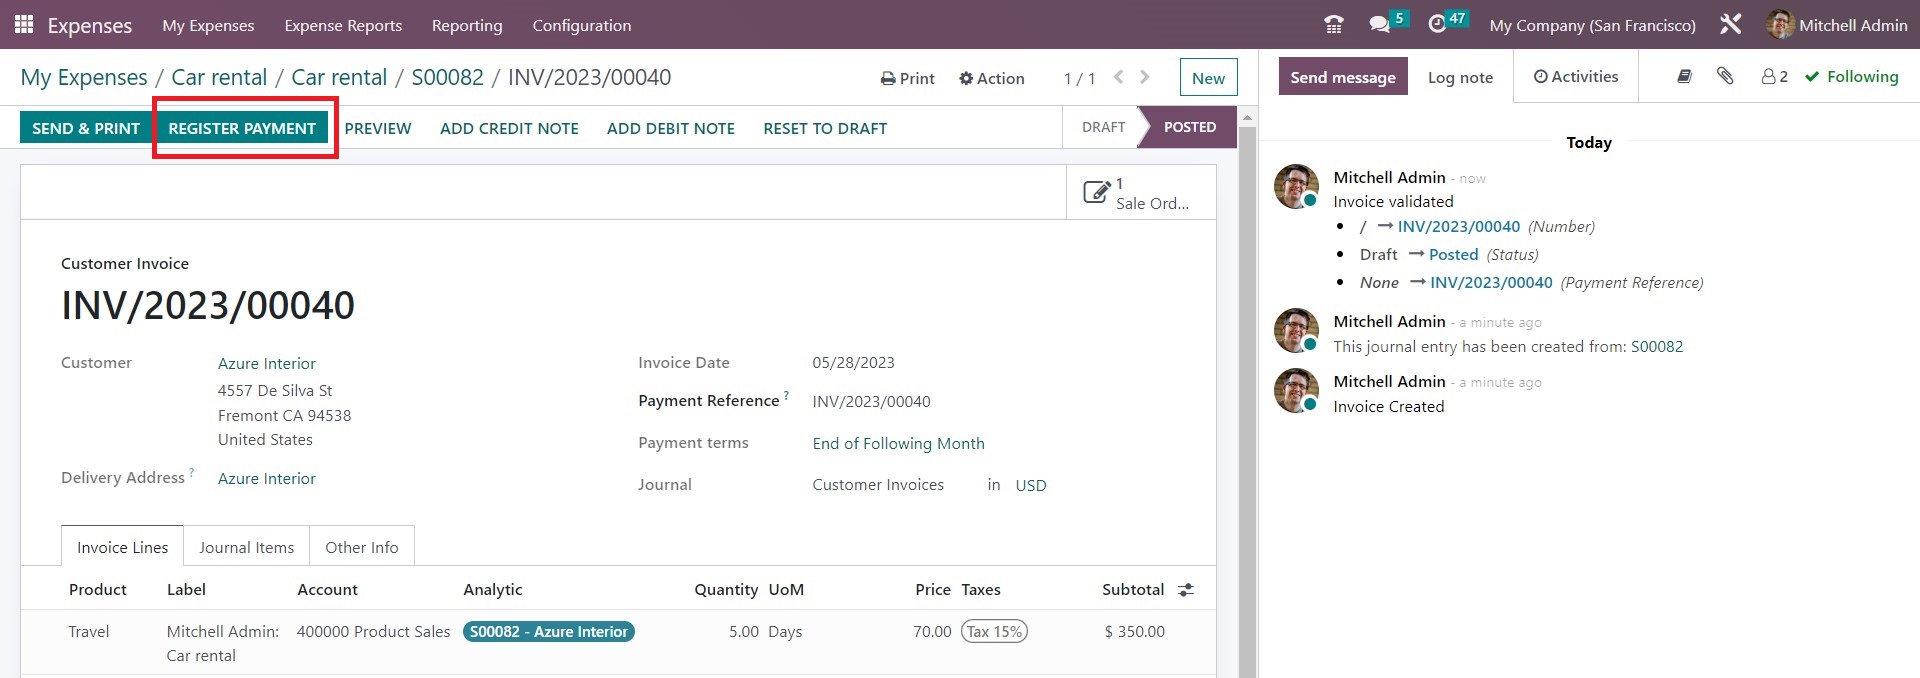 Reinvoicing Expenses To Customers in Odoo - 15 - Midis